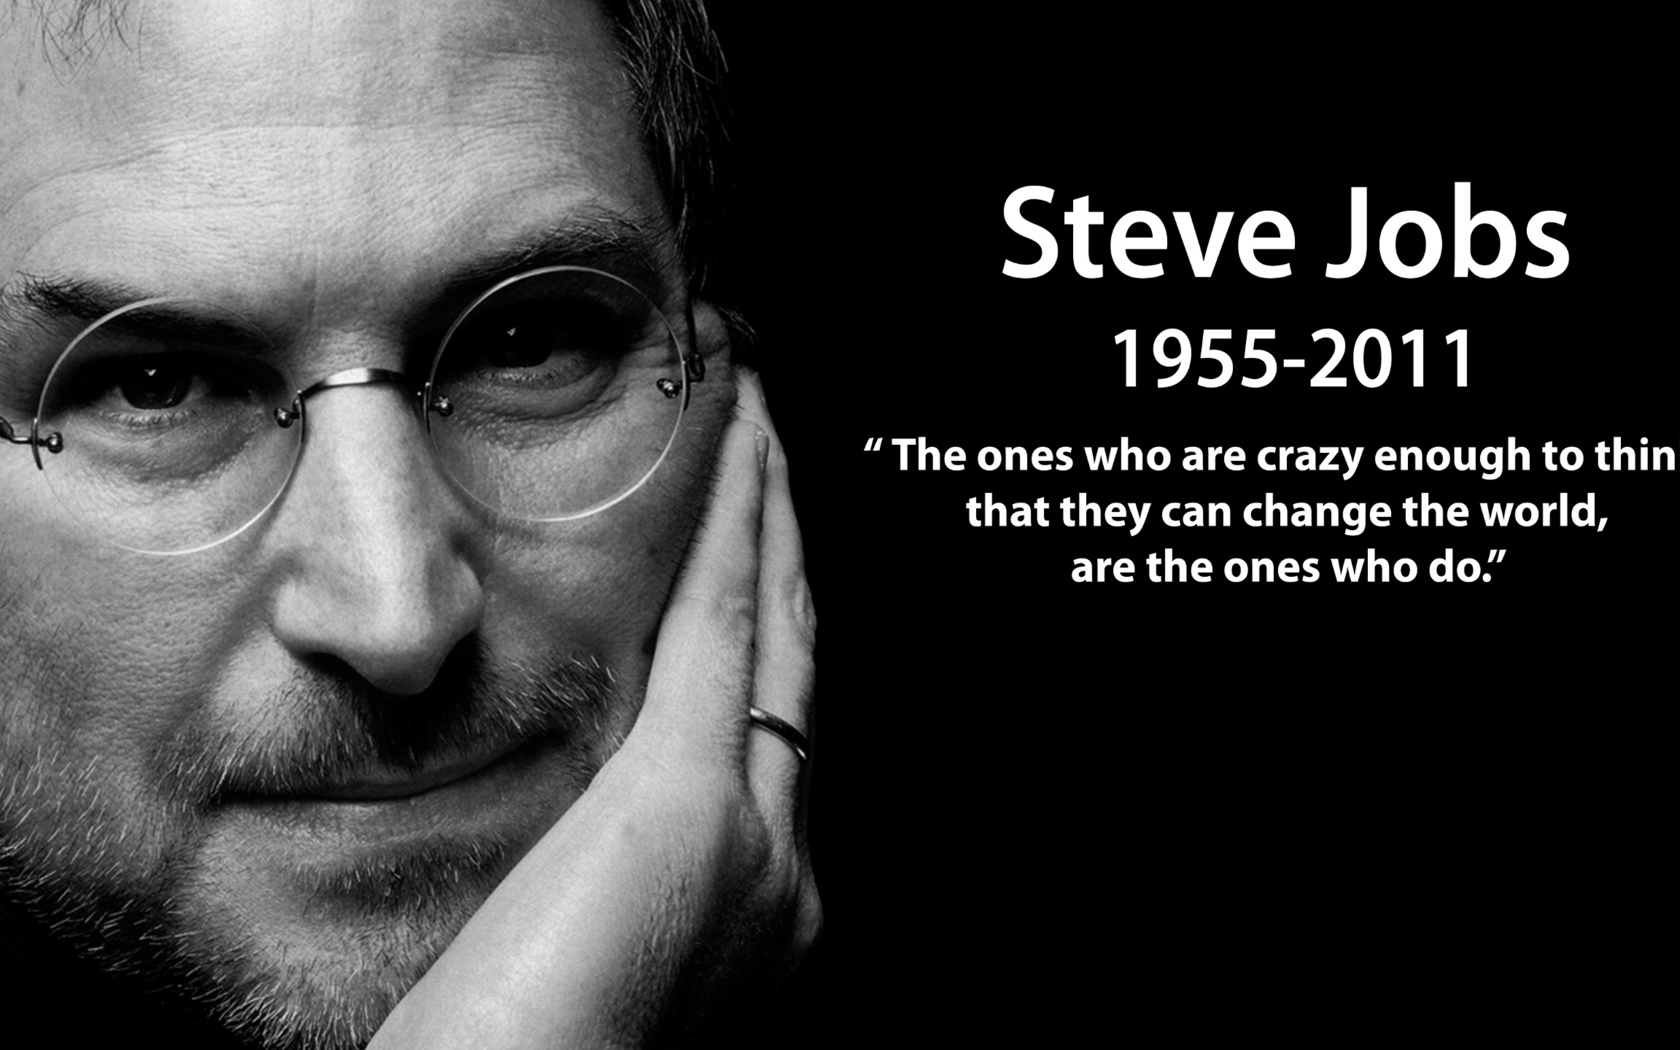 10 Steve Jobs Marketing Lessons and his Famous Marketing Quotes